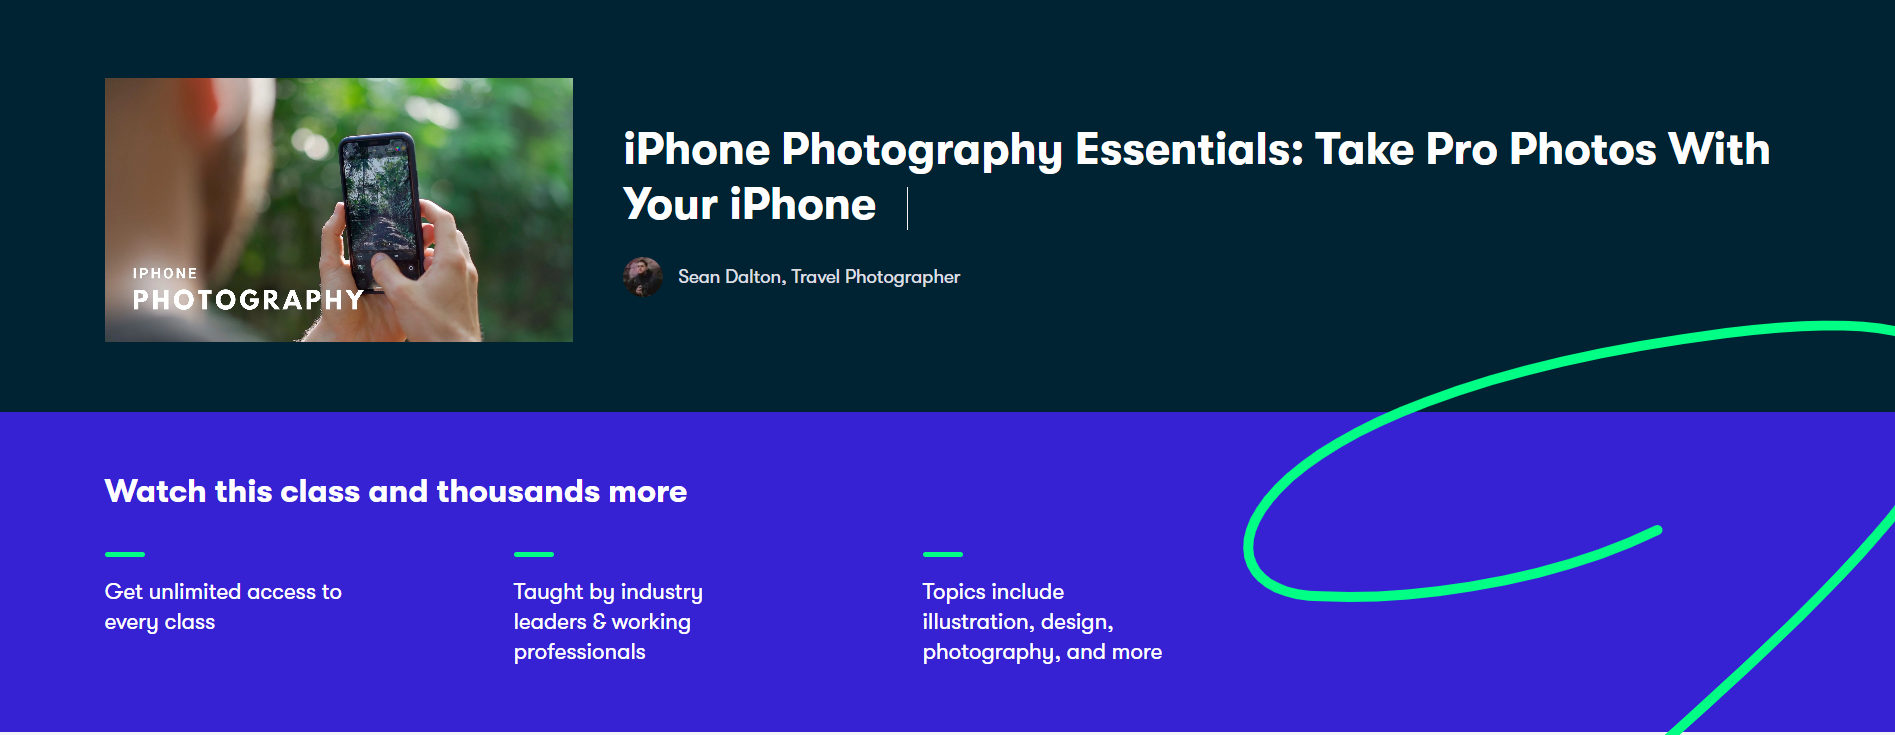 Take Pro Photos With Your iPhone